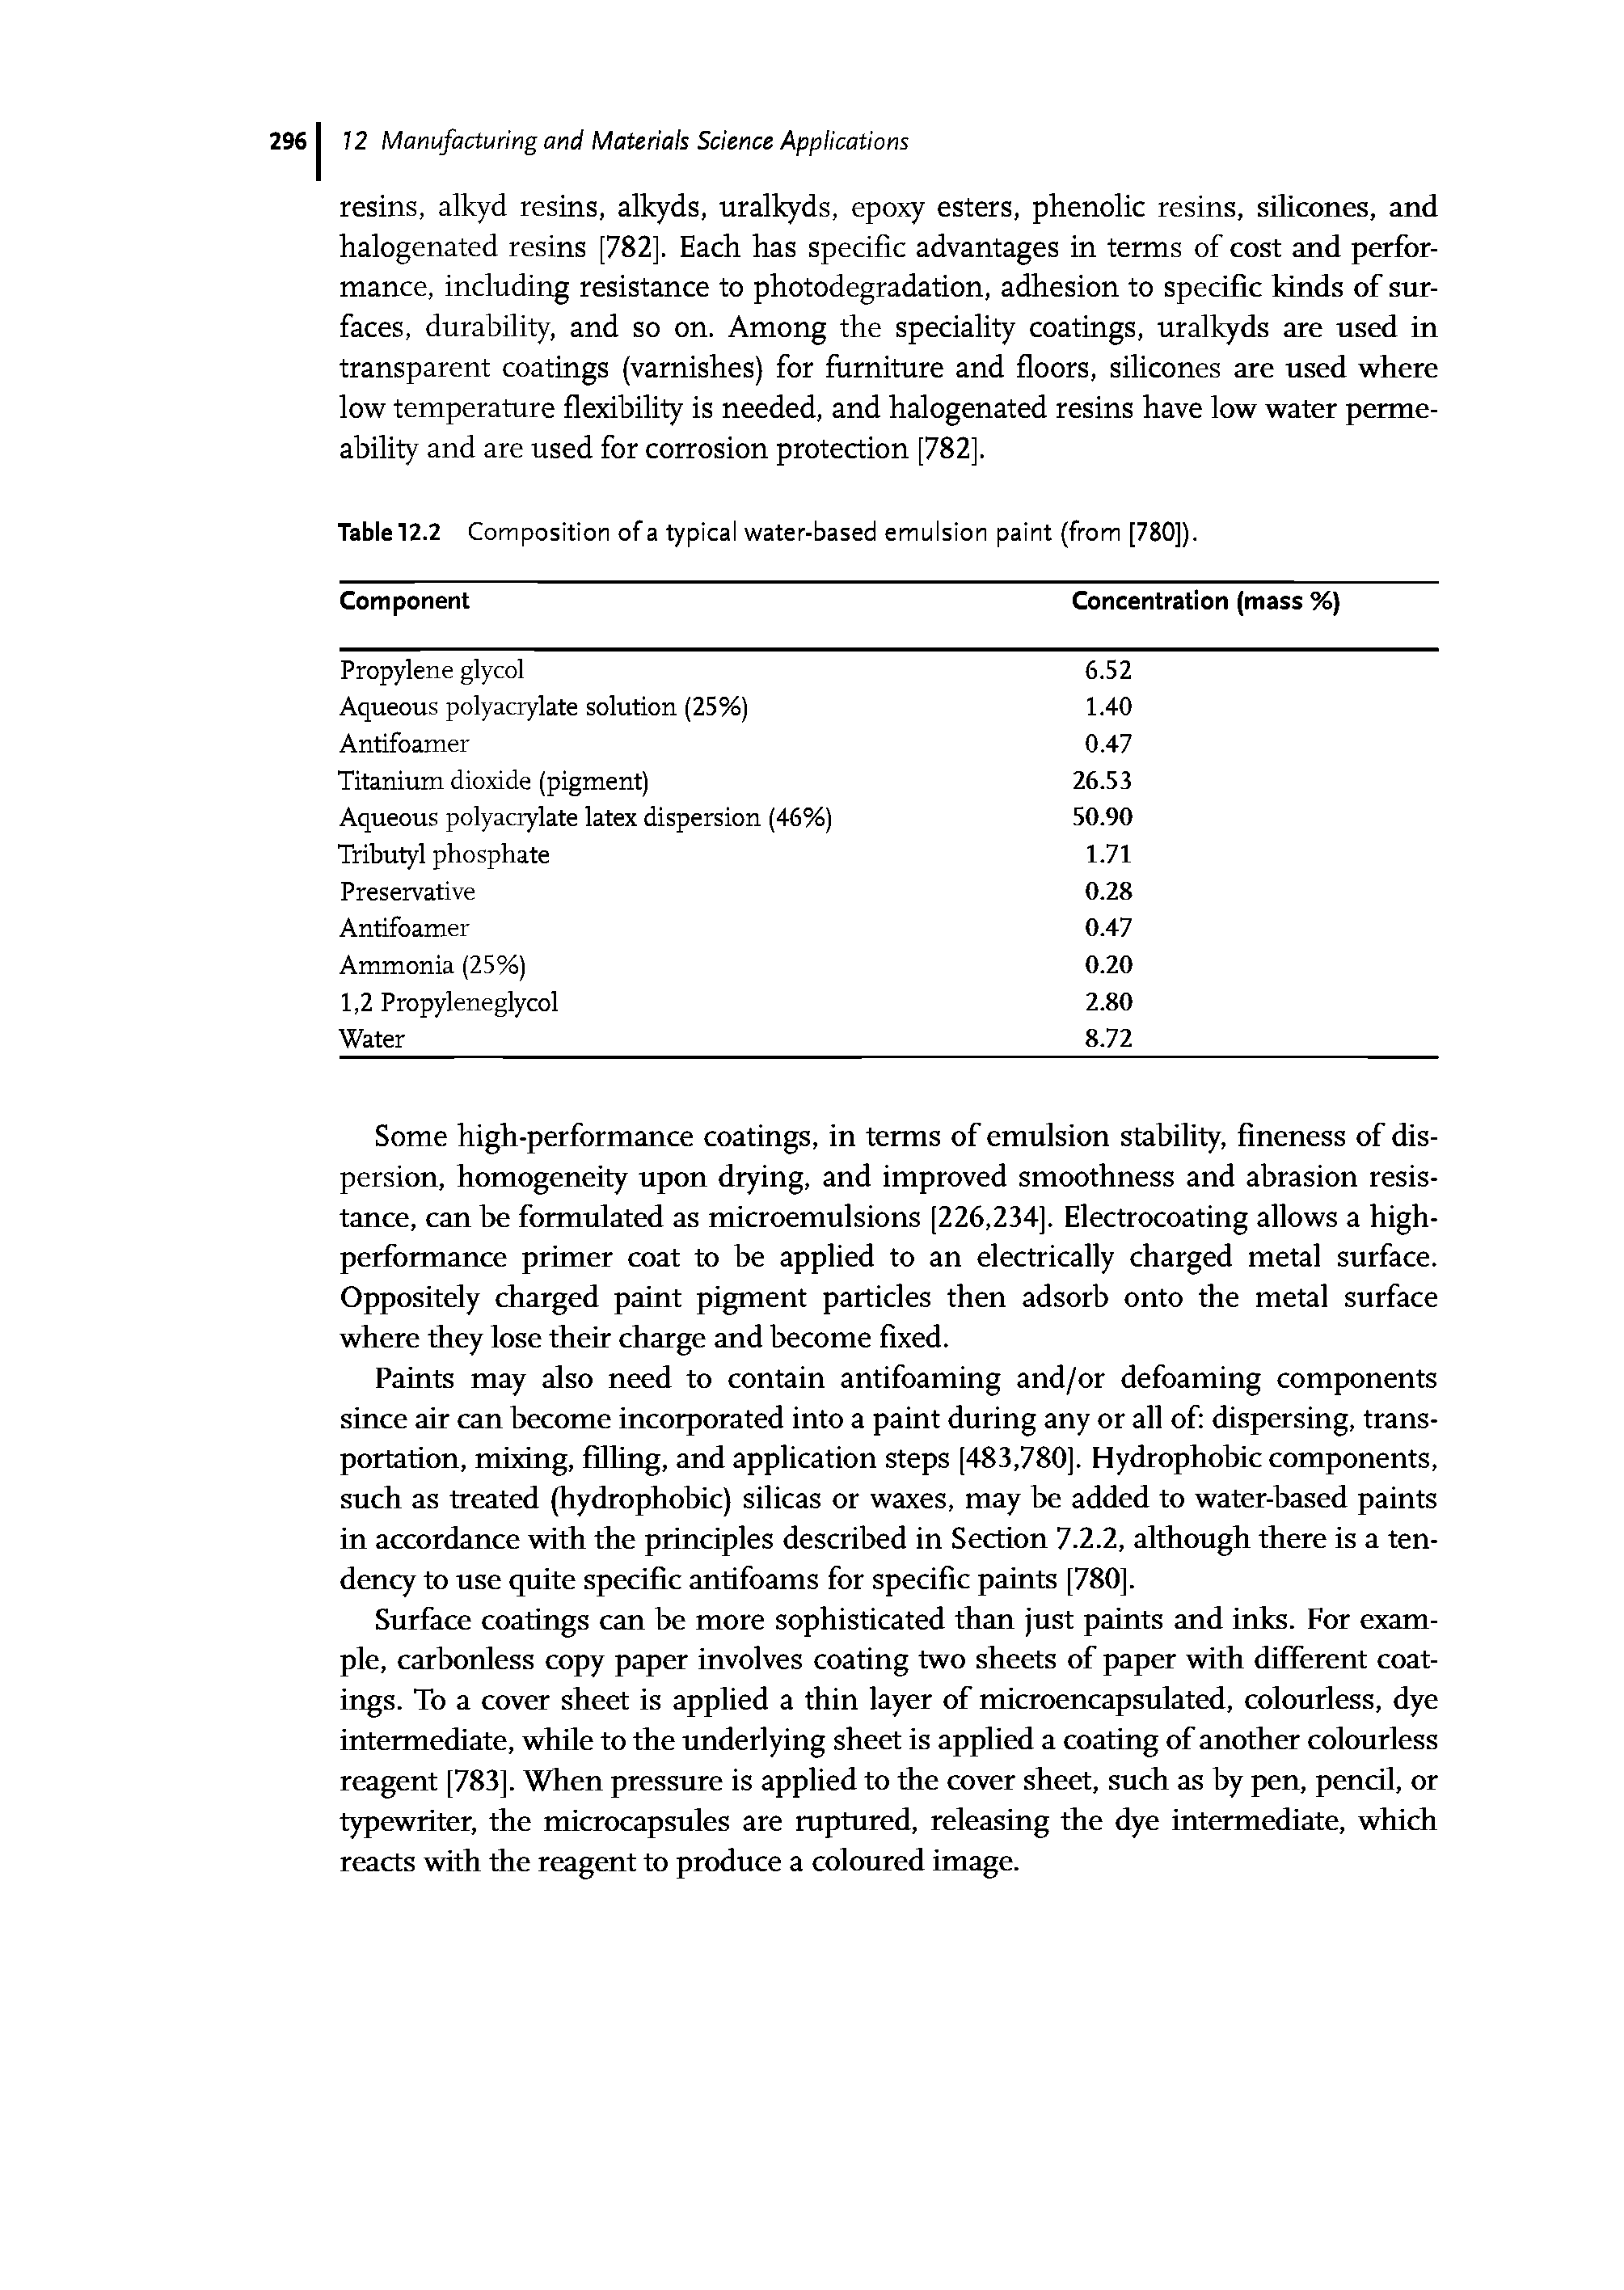 Table 12.2 Composition of a typical water-based emulsion paint (from [780]).